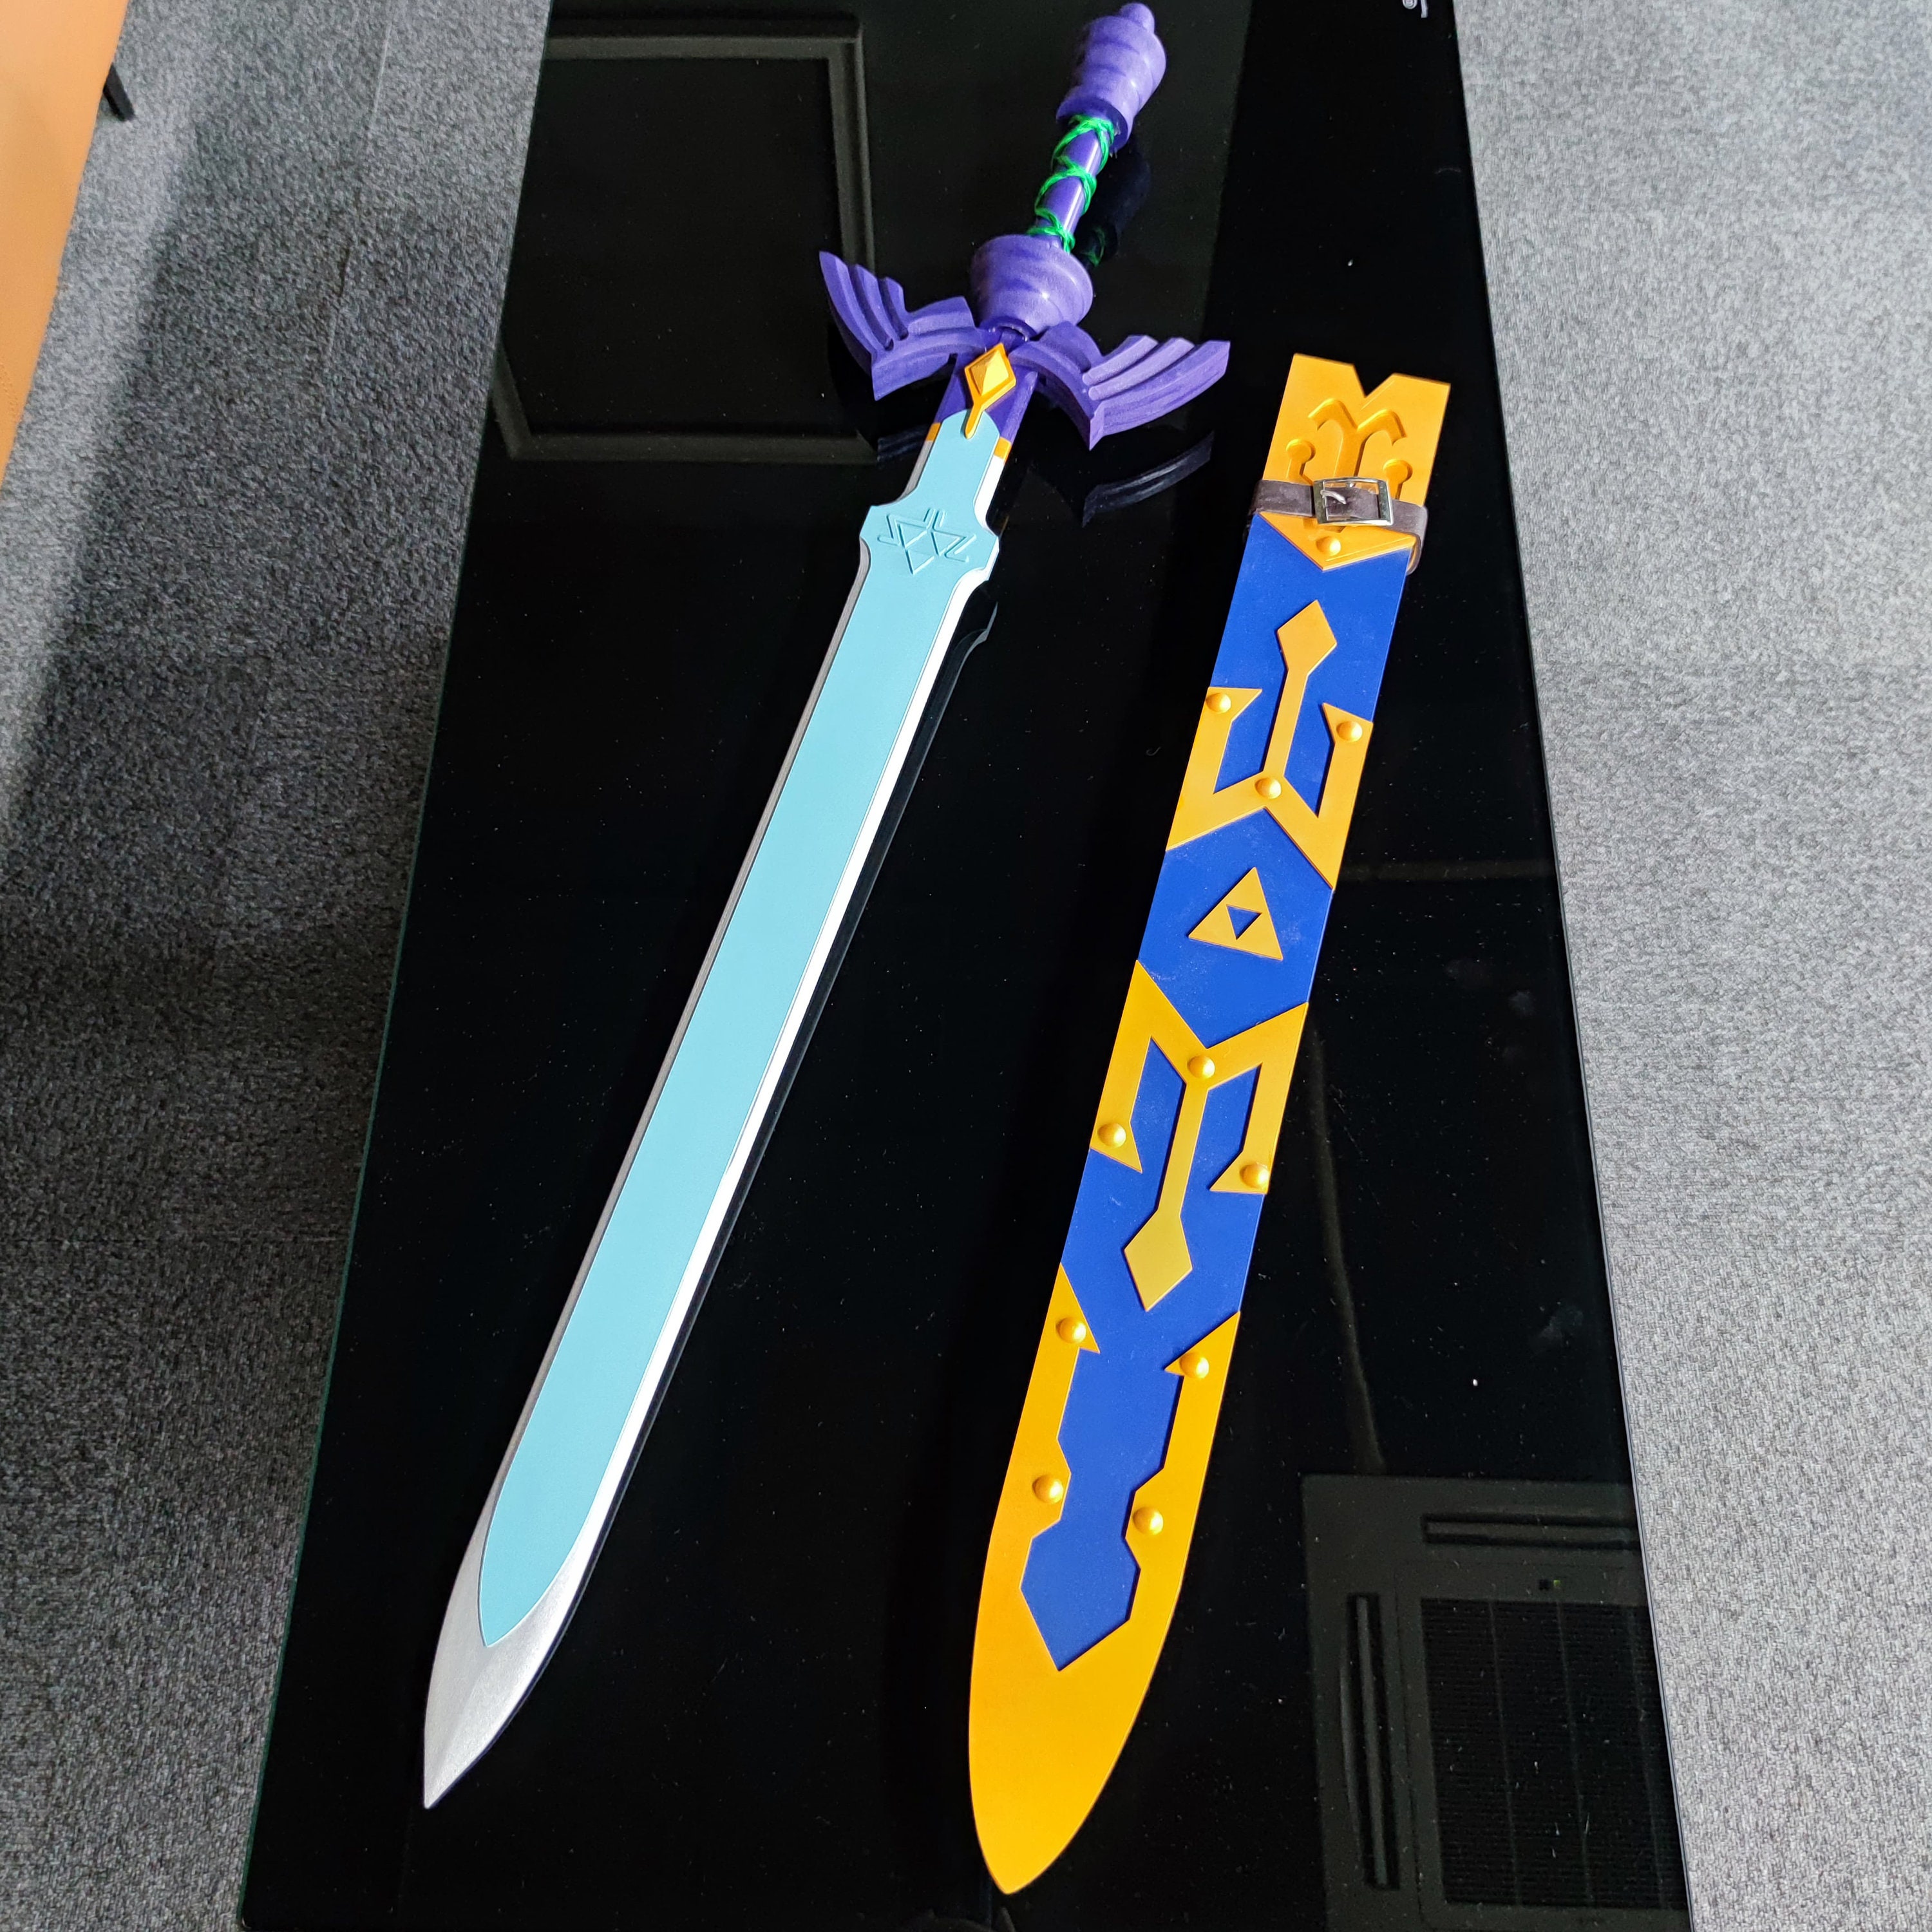 Self] I made a Master Sword from Breath of the Wild for a comission and I  think it turned out great! : r/cosplay